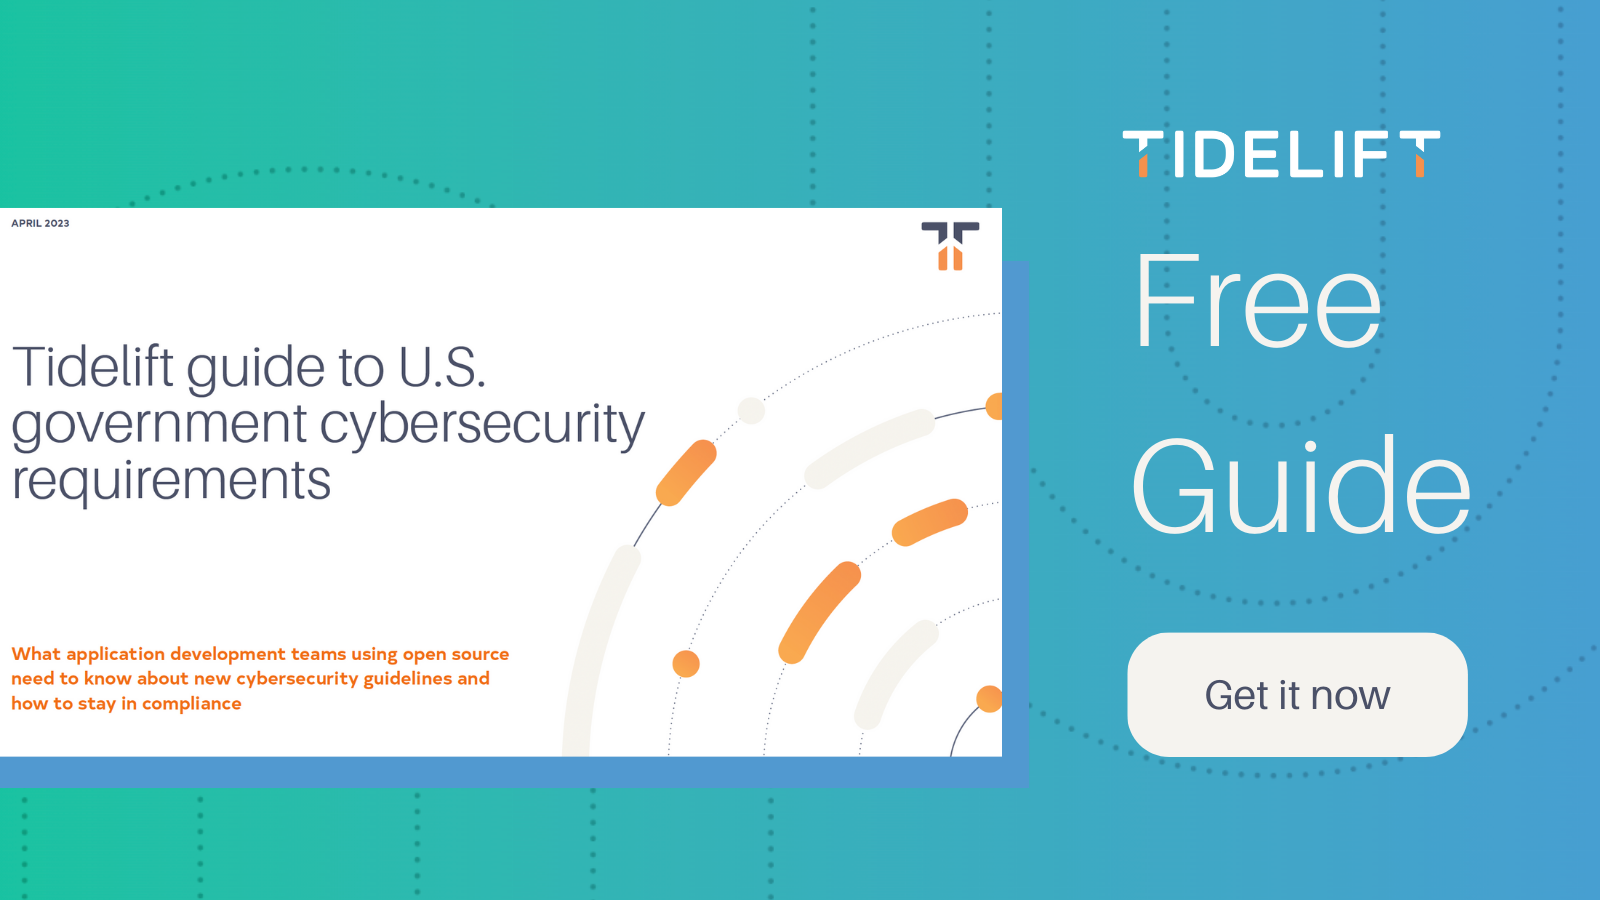 Tidelift guide to U.S. government cybersecurity requirements